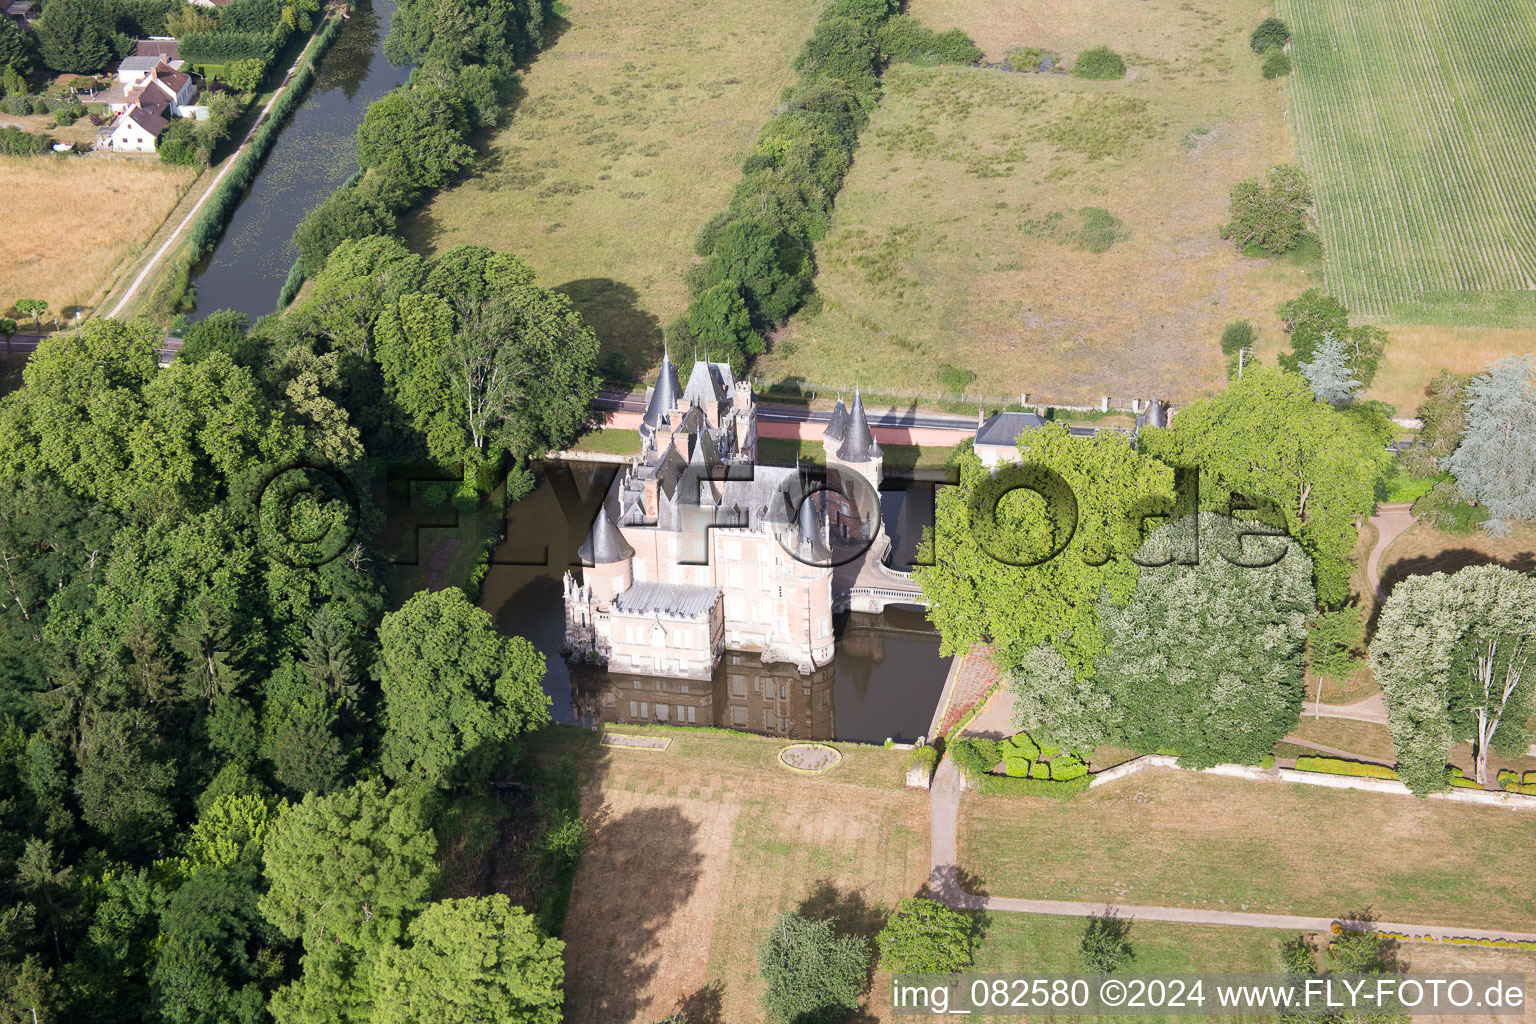 Château de Combreux in Combreux in the state Loiret, France seen from above